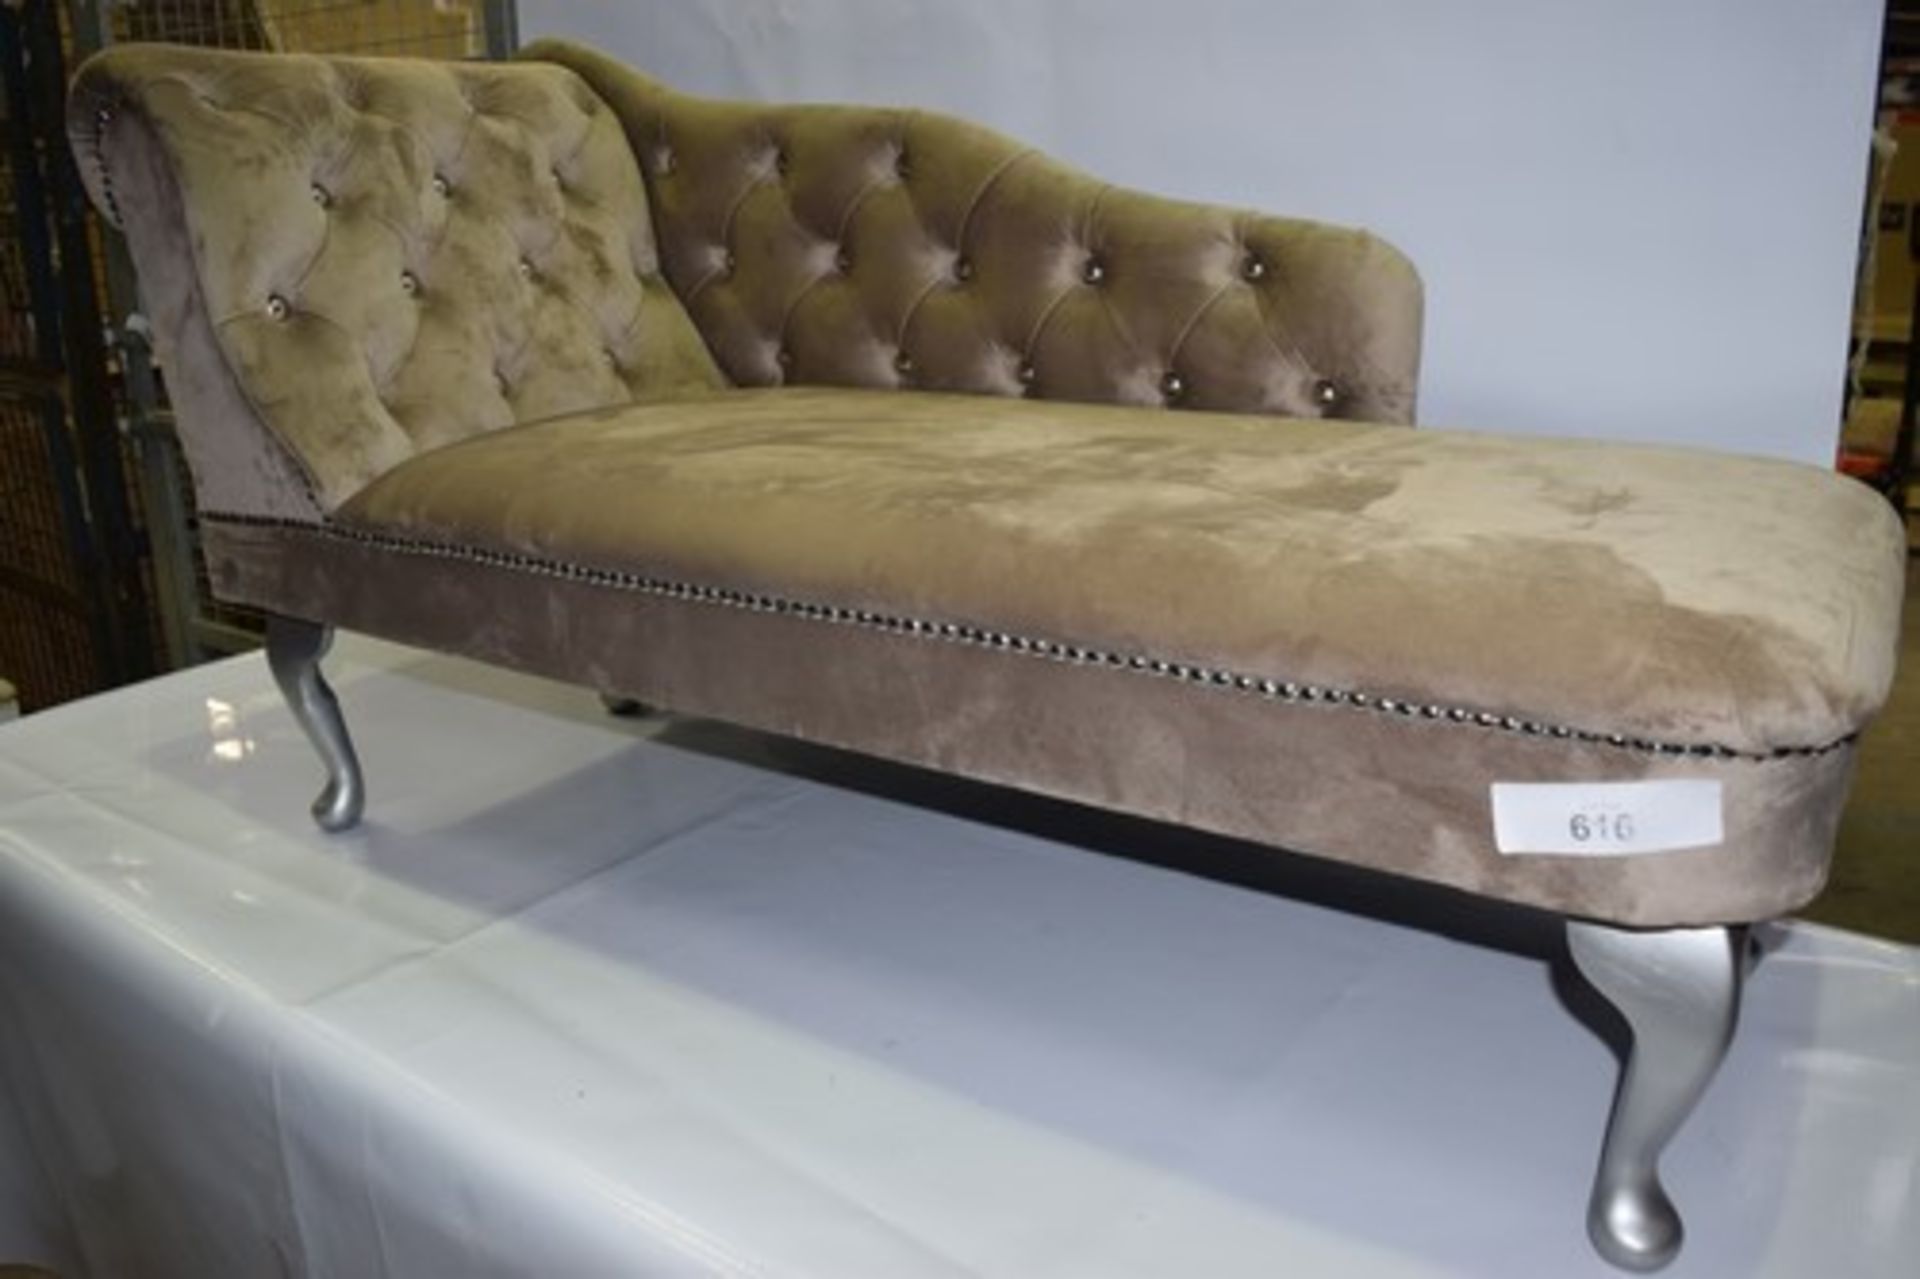 1 x Unbranded Chaise longue sofa- colour fawn/brown with silver feet. -new- (GS33B)